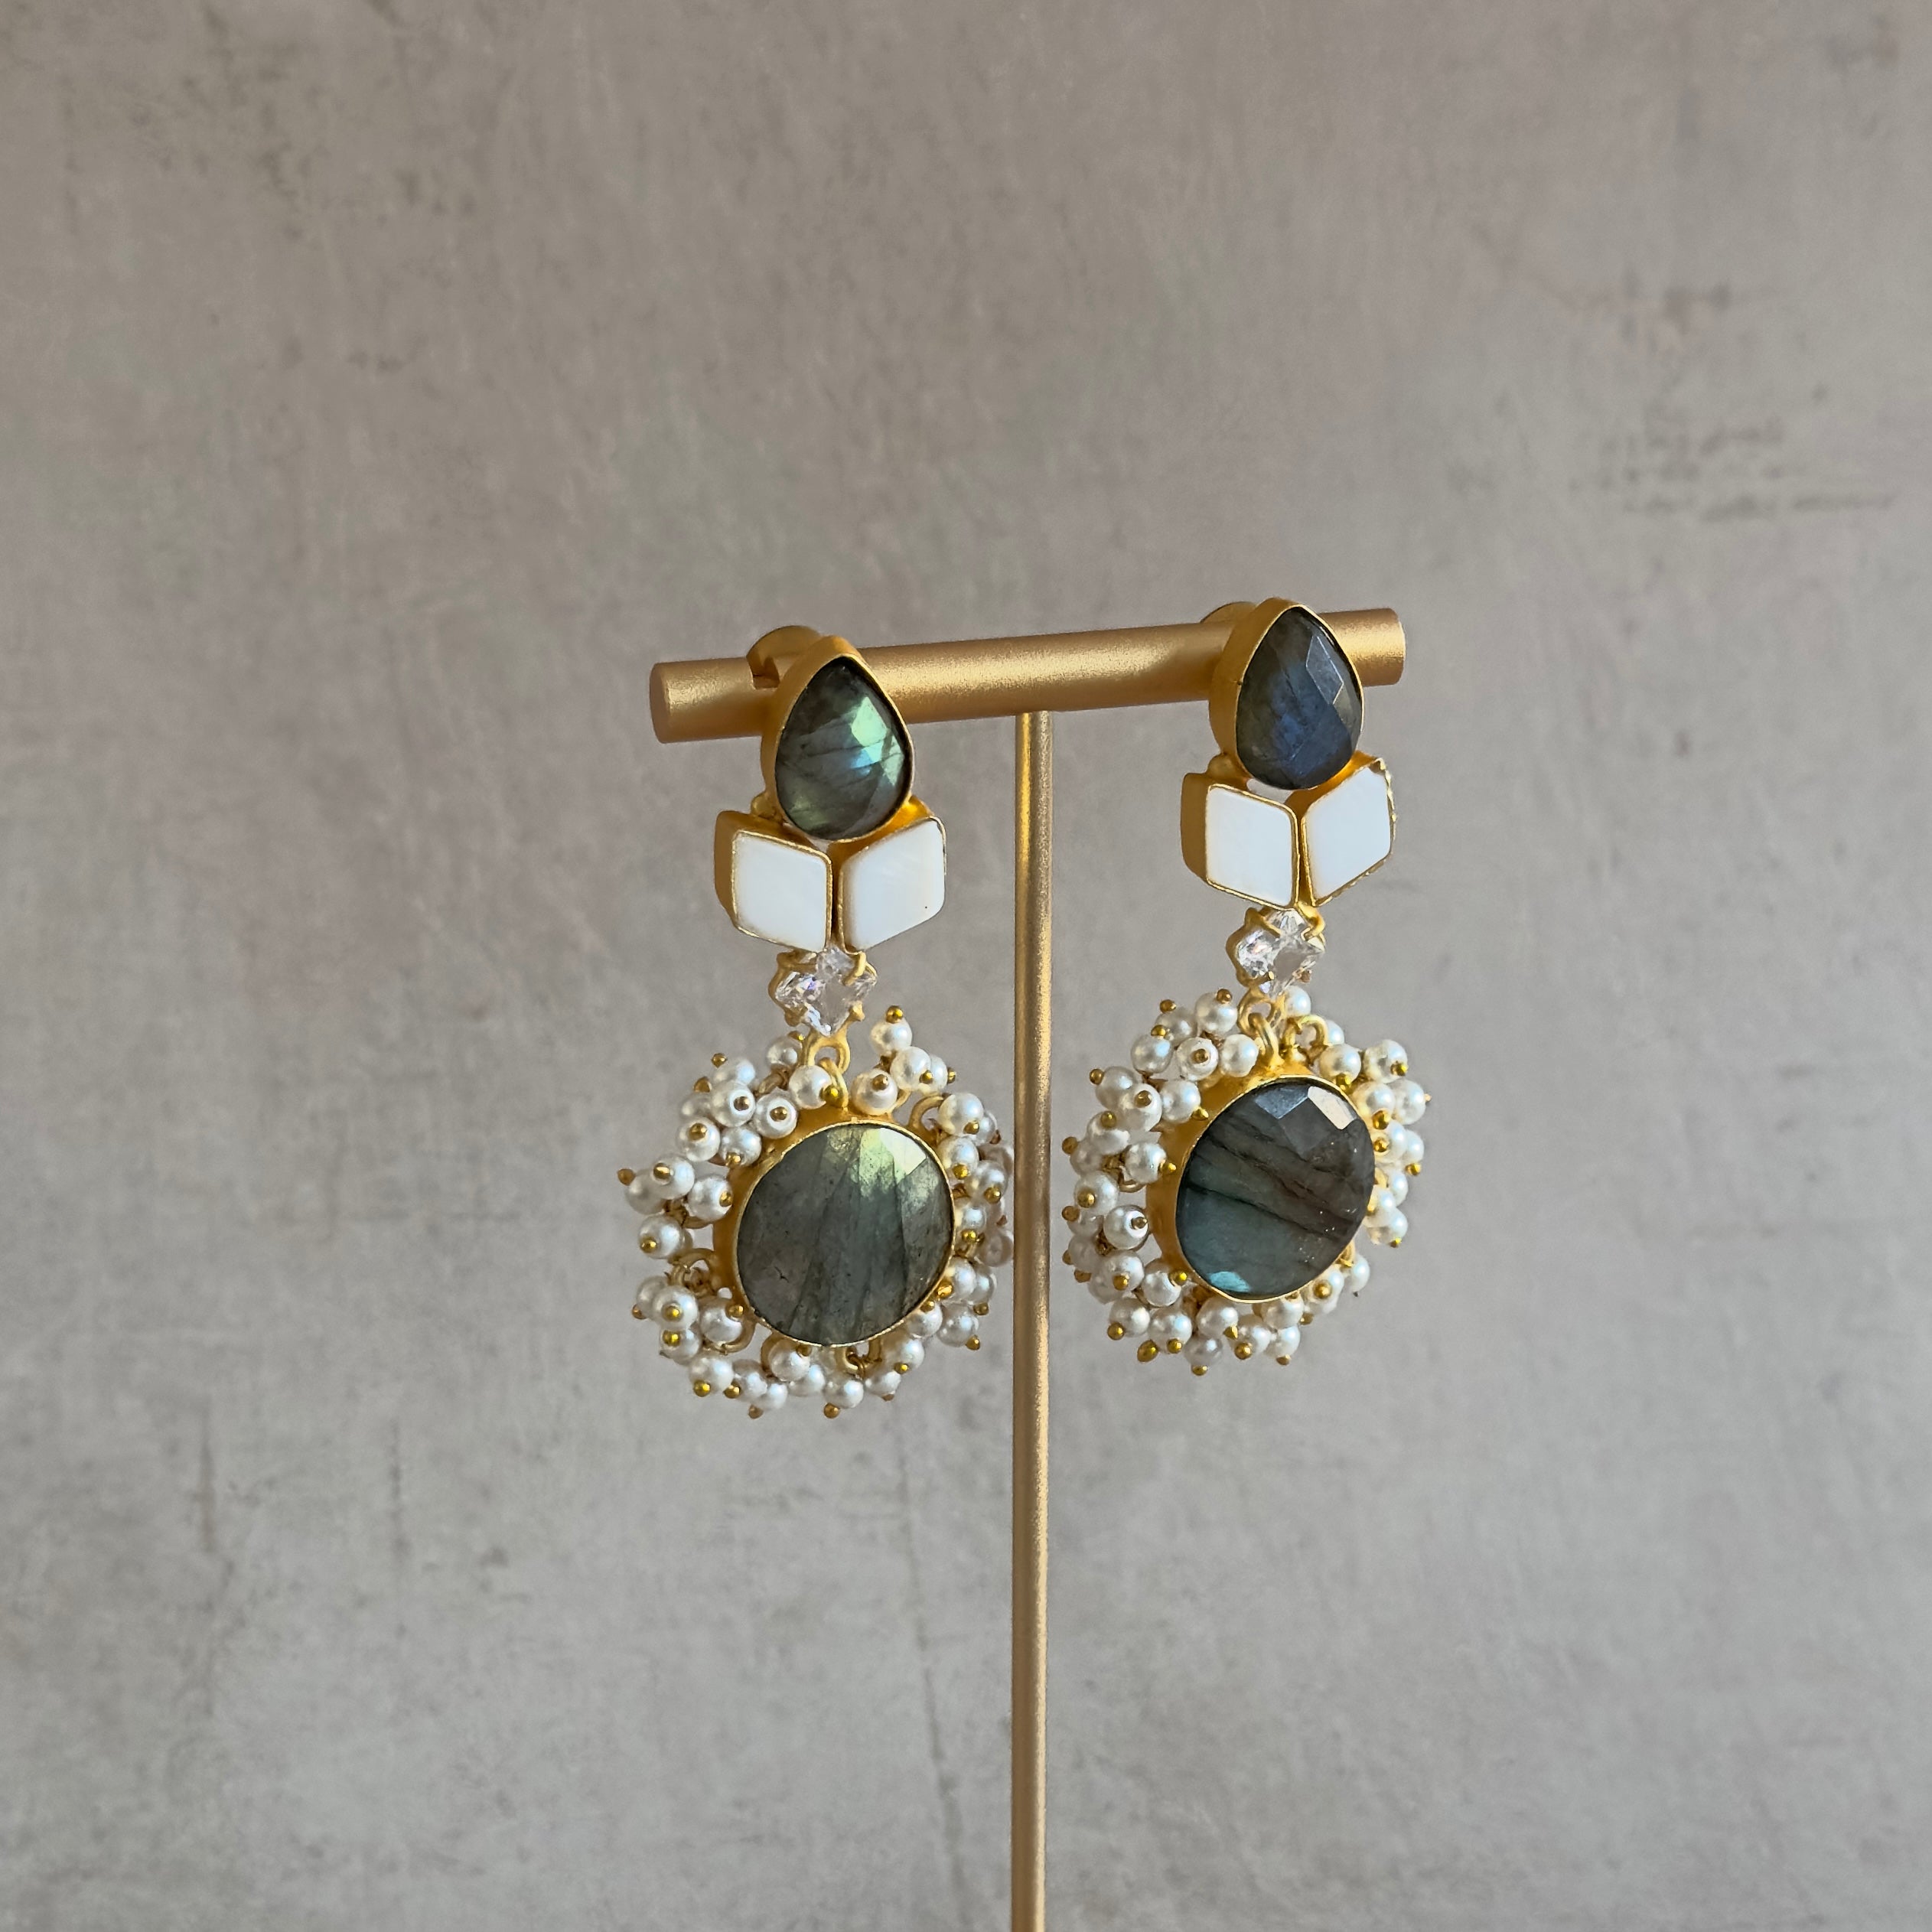 Made with stunning labradorite gemstones and mother of pearl, our Mara Drop Earrings are a must-have for any jewelry lover. These gorgeous earrings are perfect for adding a touch of elegance and sophistication to any outfit. Upgrade your accessory game with the Mara Drop Earrings!